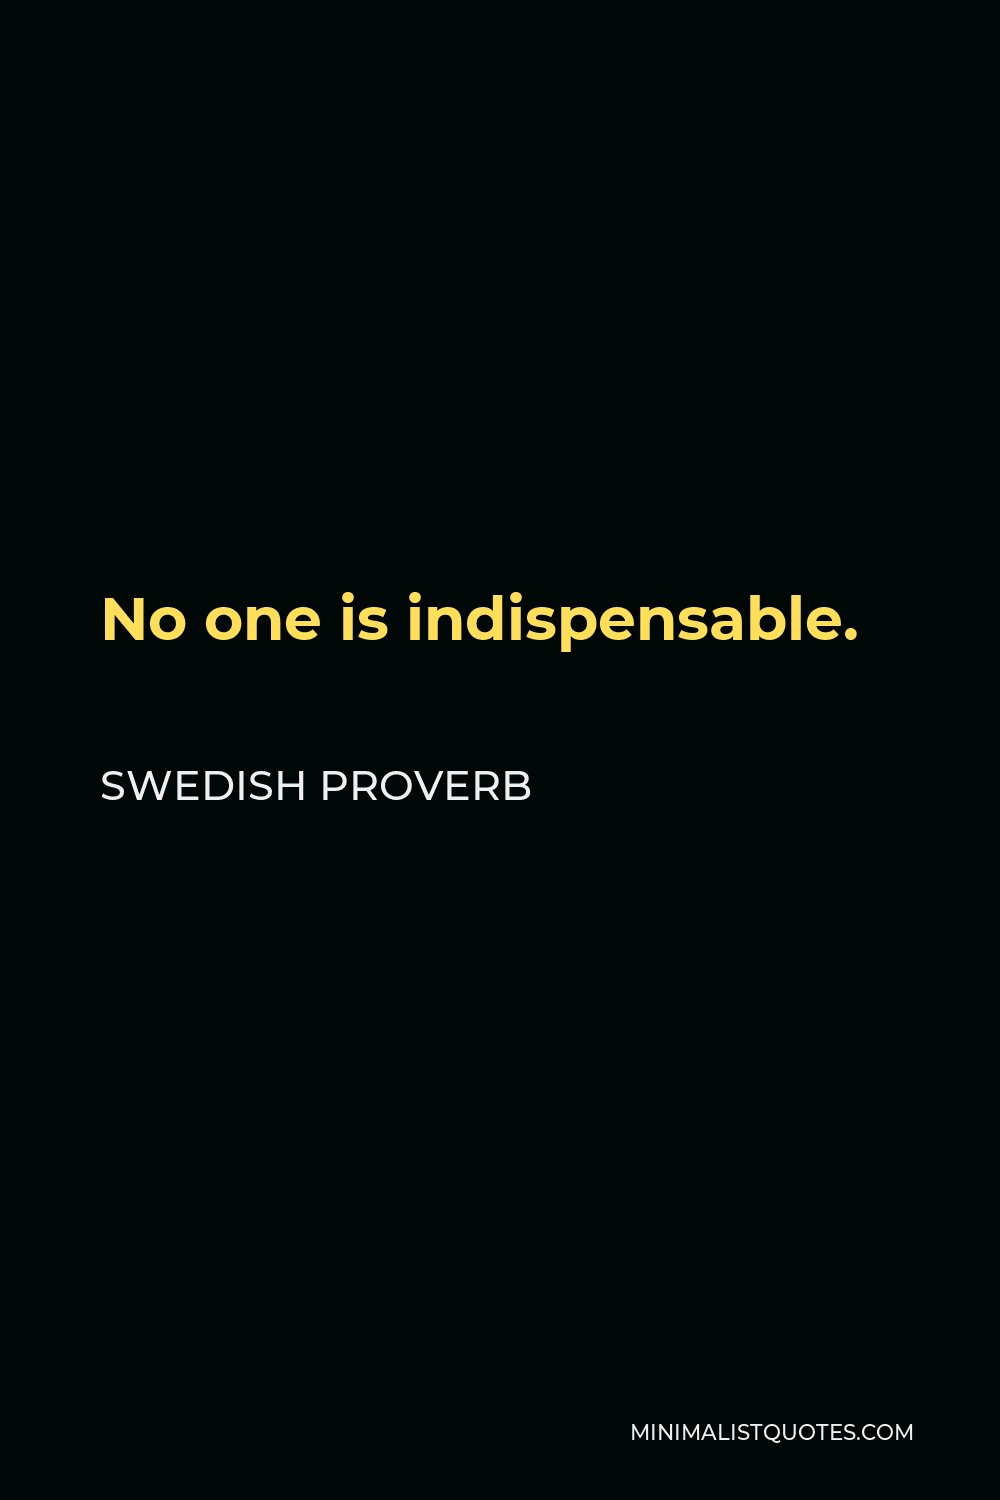 Swedish Proverb Quote - No one is indispensable.